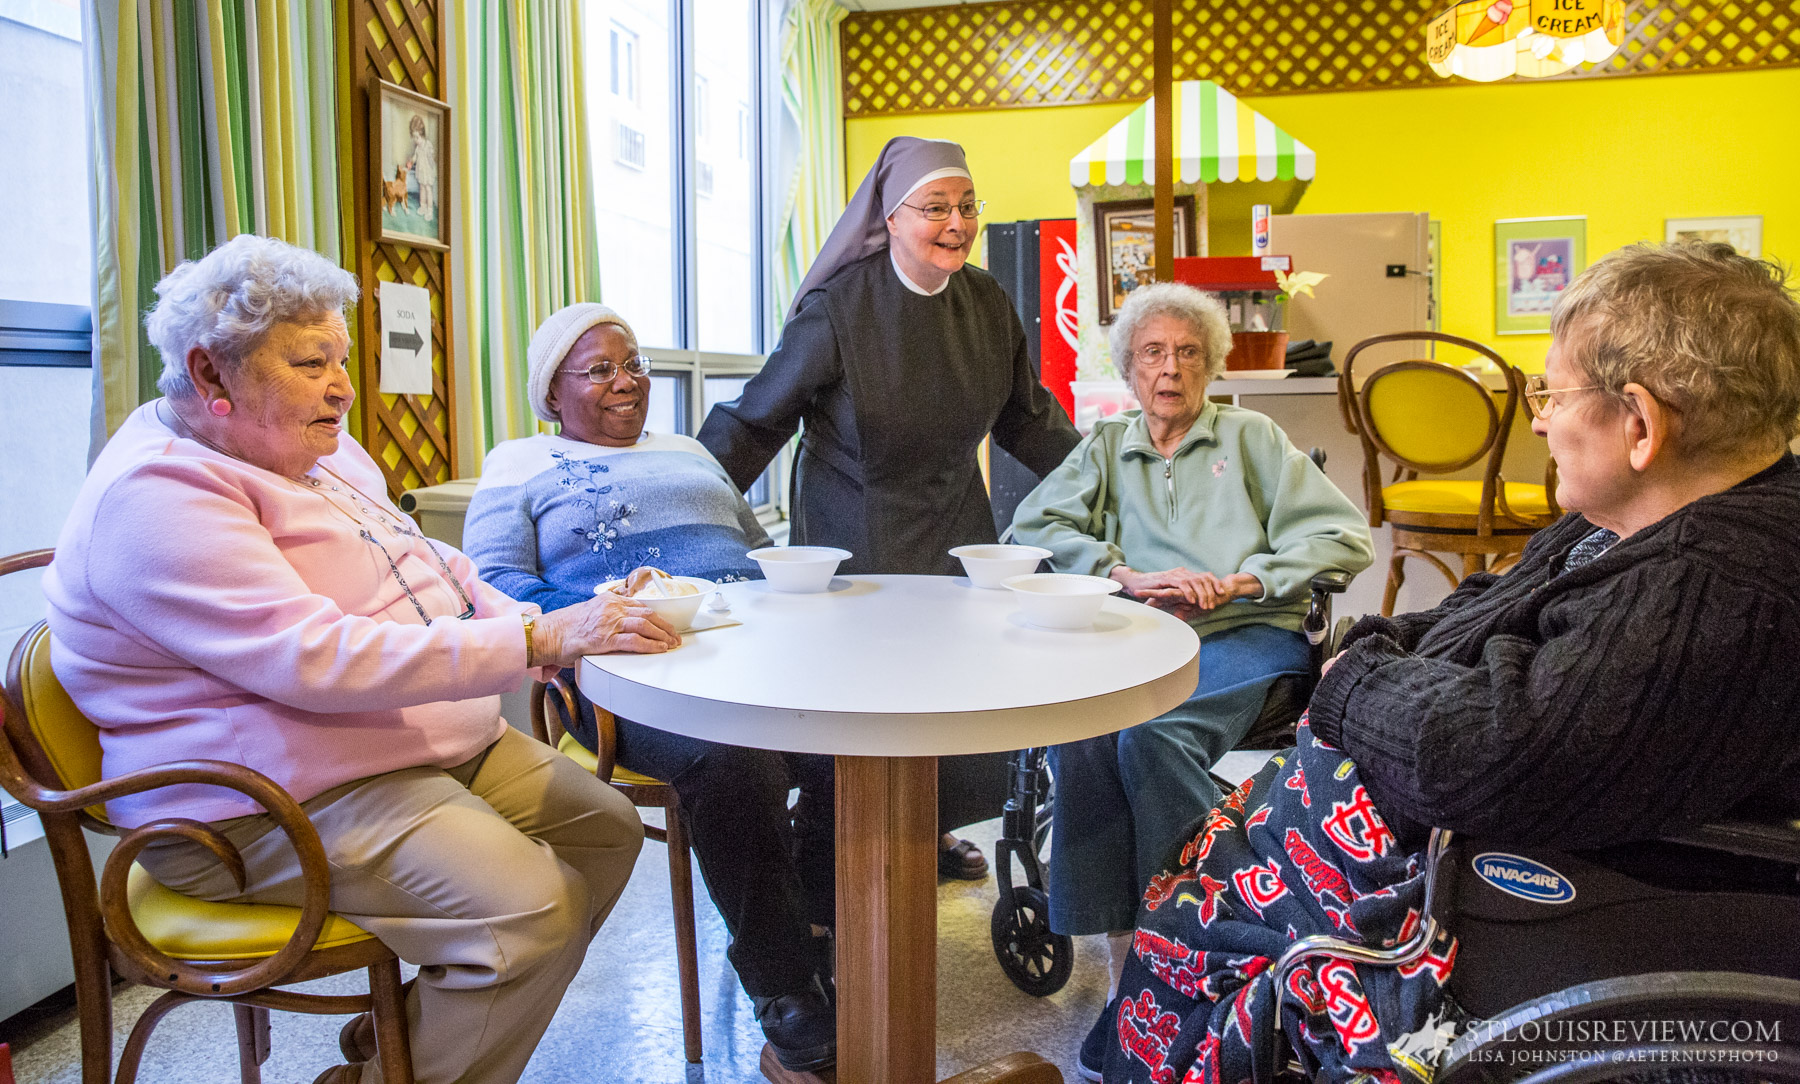 Sister Joseph Maureen Hobin, LSP, joked with residents (from left) Mary Hafner, Ester Allen, Mary Louise Doetsch and Maureen Giraffa, after they had snacks of ice
cream and popcorn. The Little Sisters of the Poor continue to assist the elderly poor but support is sought for their work, including with winter heating bills.